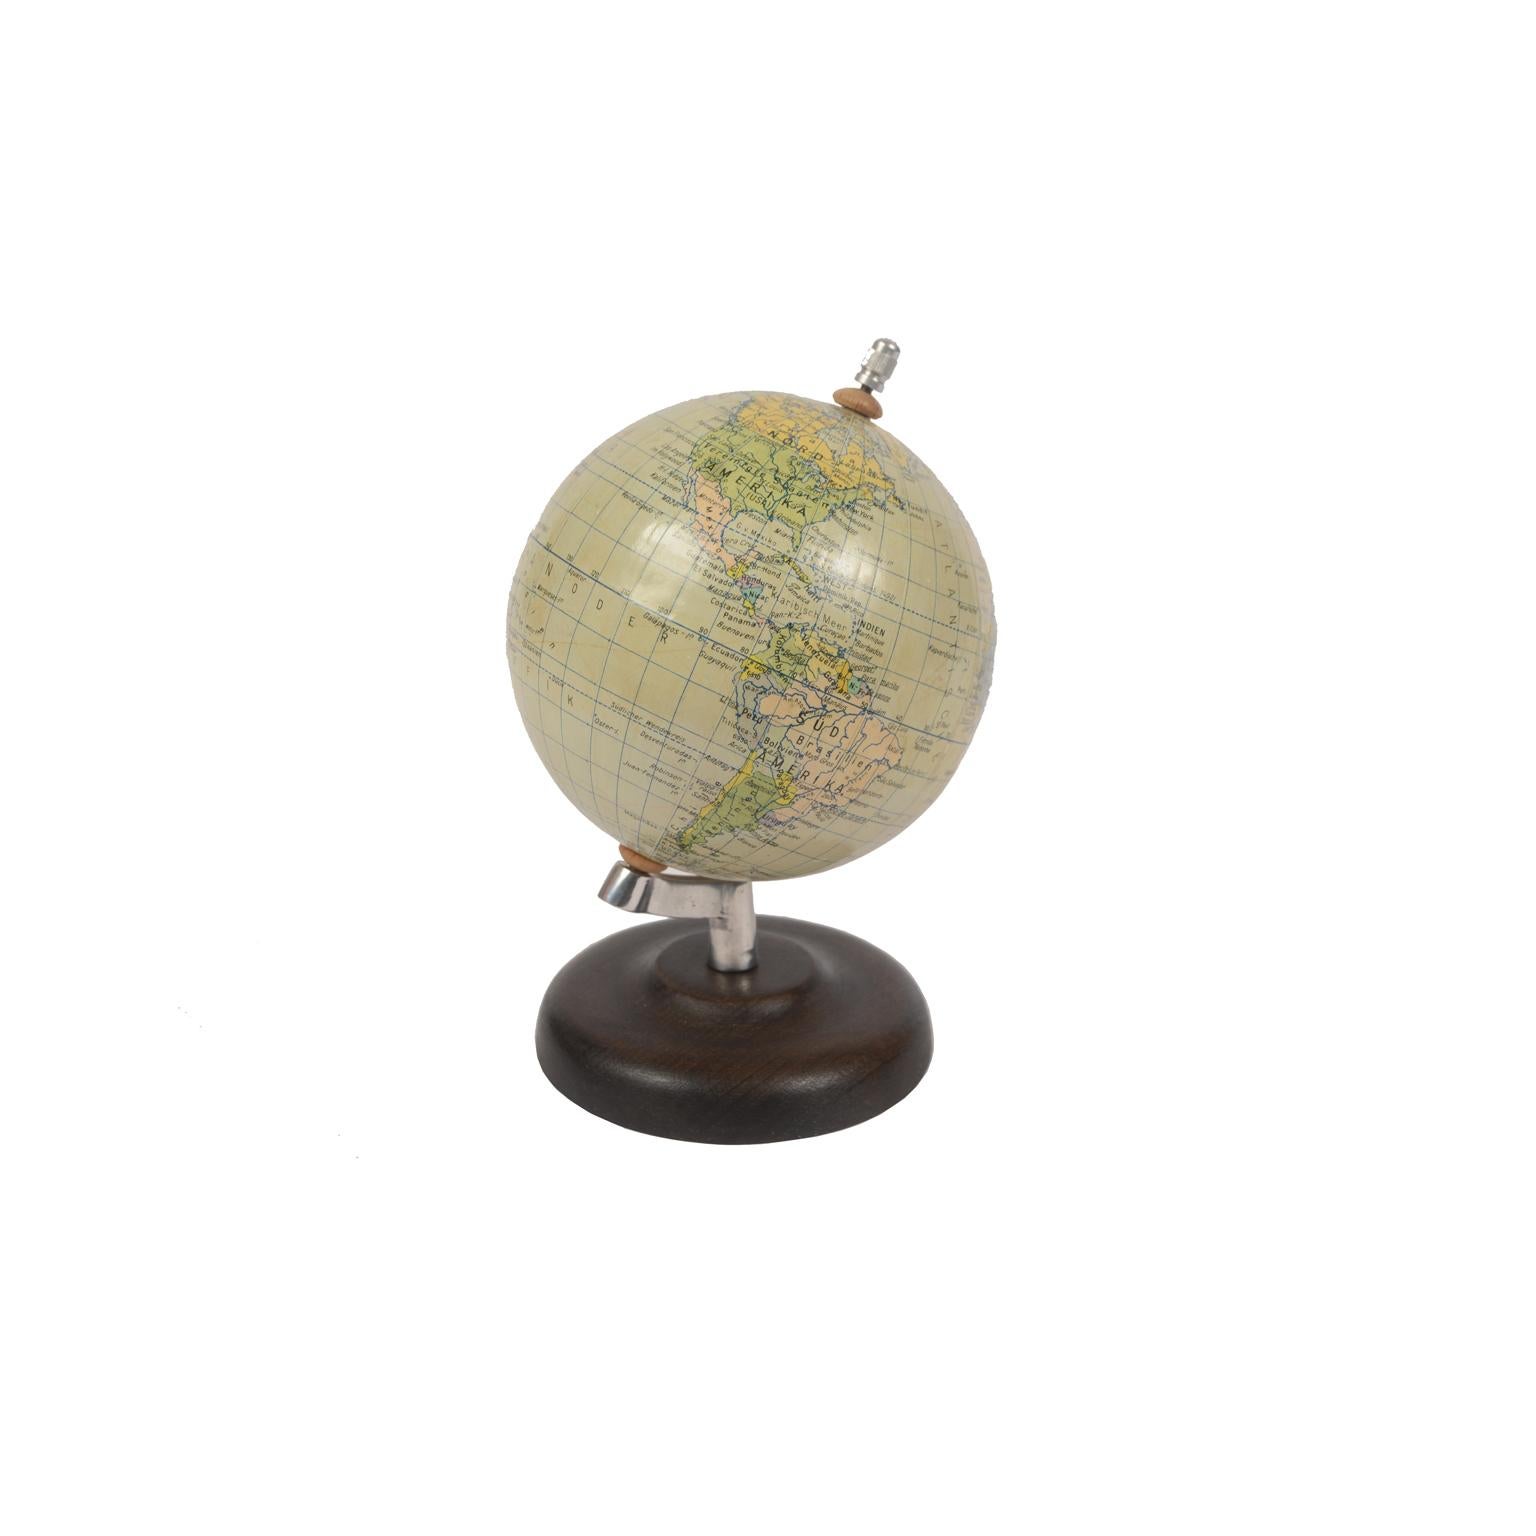 German small terrestrial globe Erdglobus by prof. Paul Rath made in the 1950s, turned wooden base and papier mâché sphere. Very good condition. Measures: Height 19 cm, sphere diameter 11 cm.
Shipping insured by Lloyd's London; it is available our